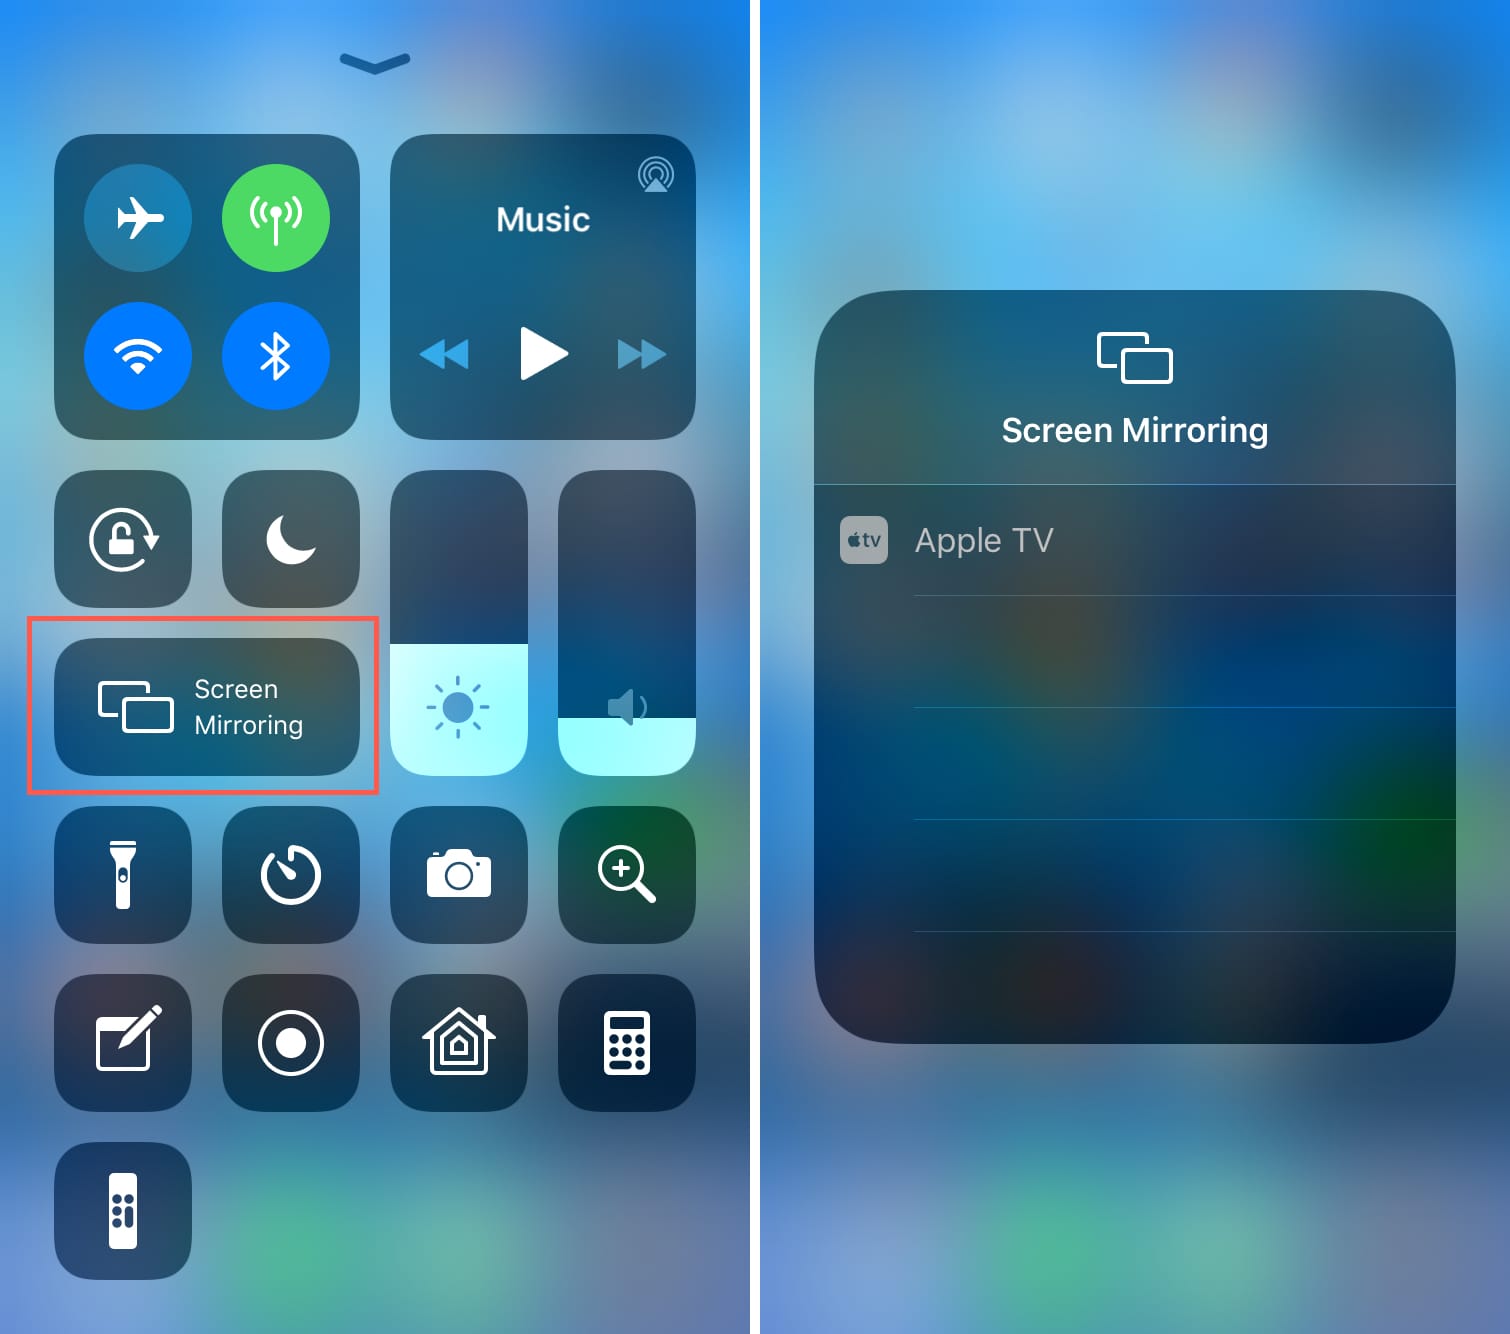 How to AirPlay or mirror your iPhone or iPad display to Apple TV